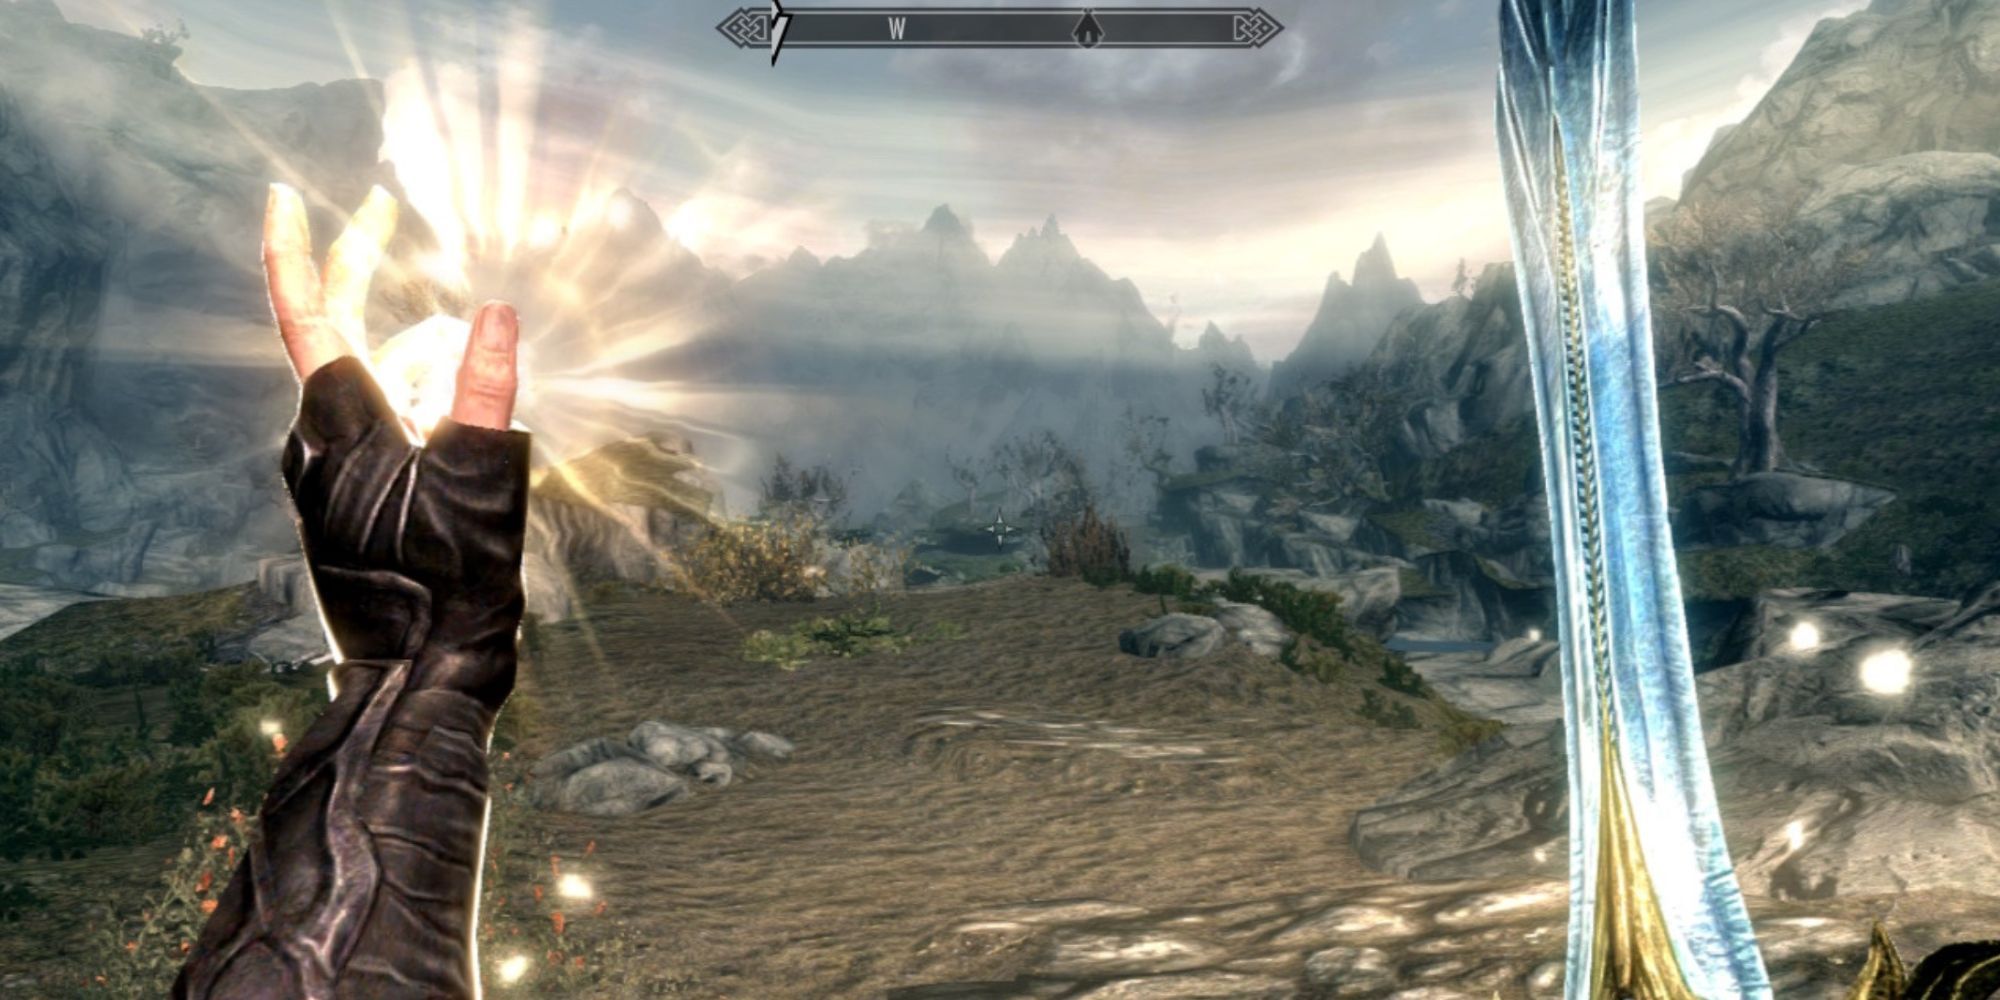 The player's left hand produces a light while his right hand carries a sword.